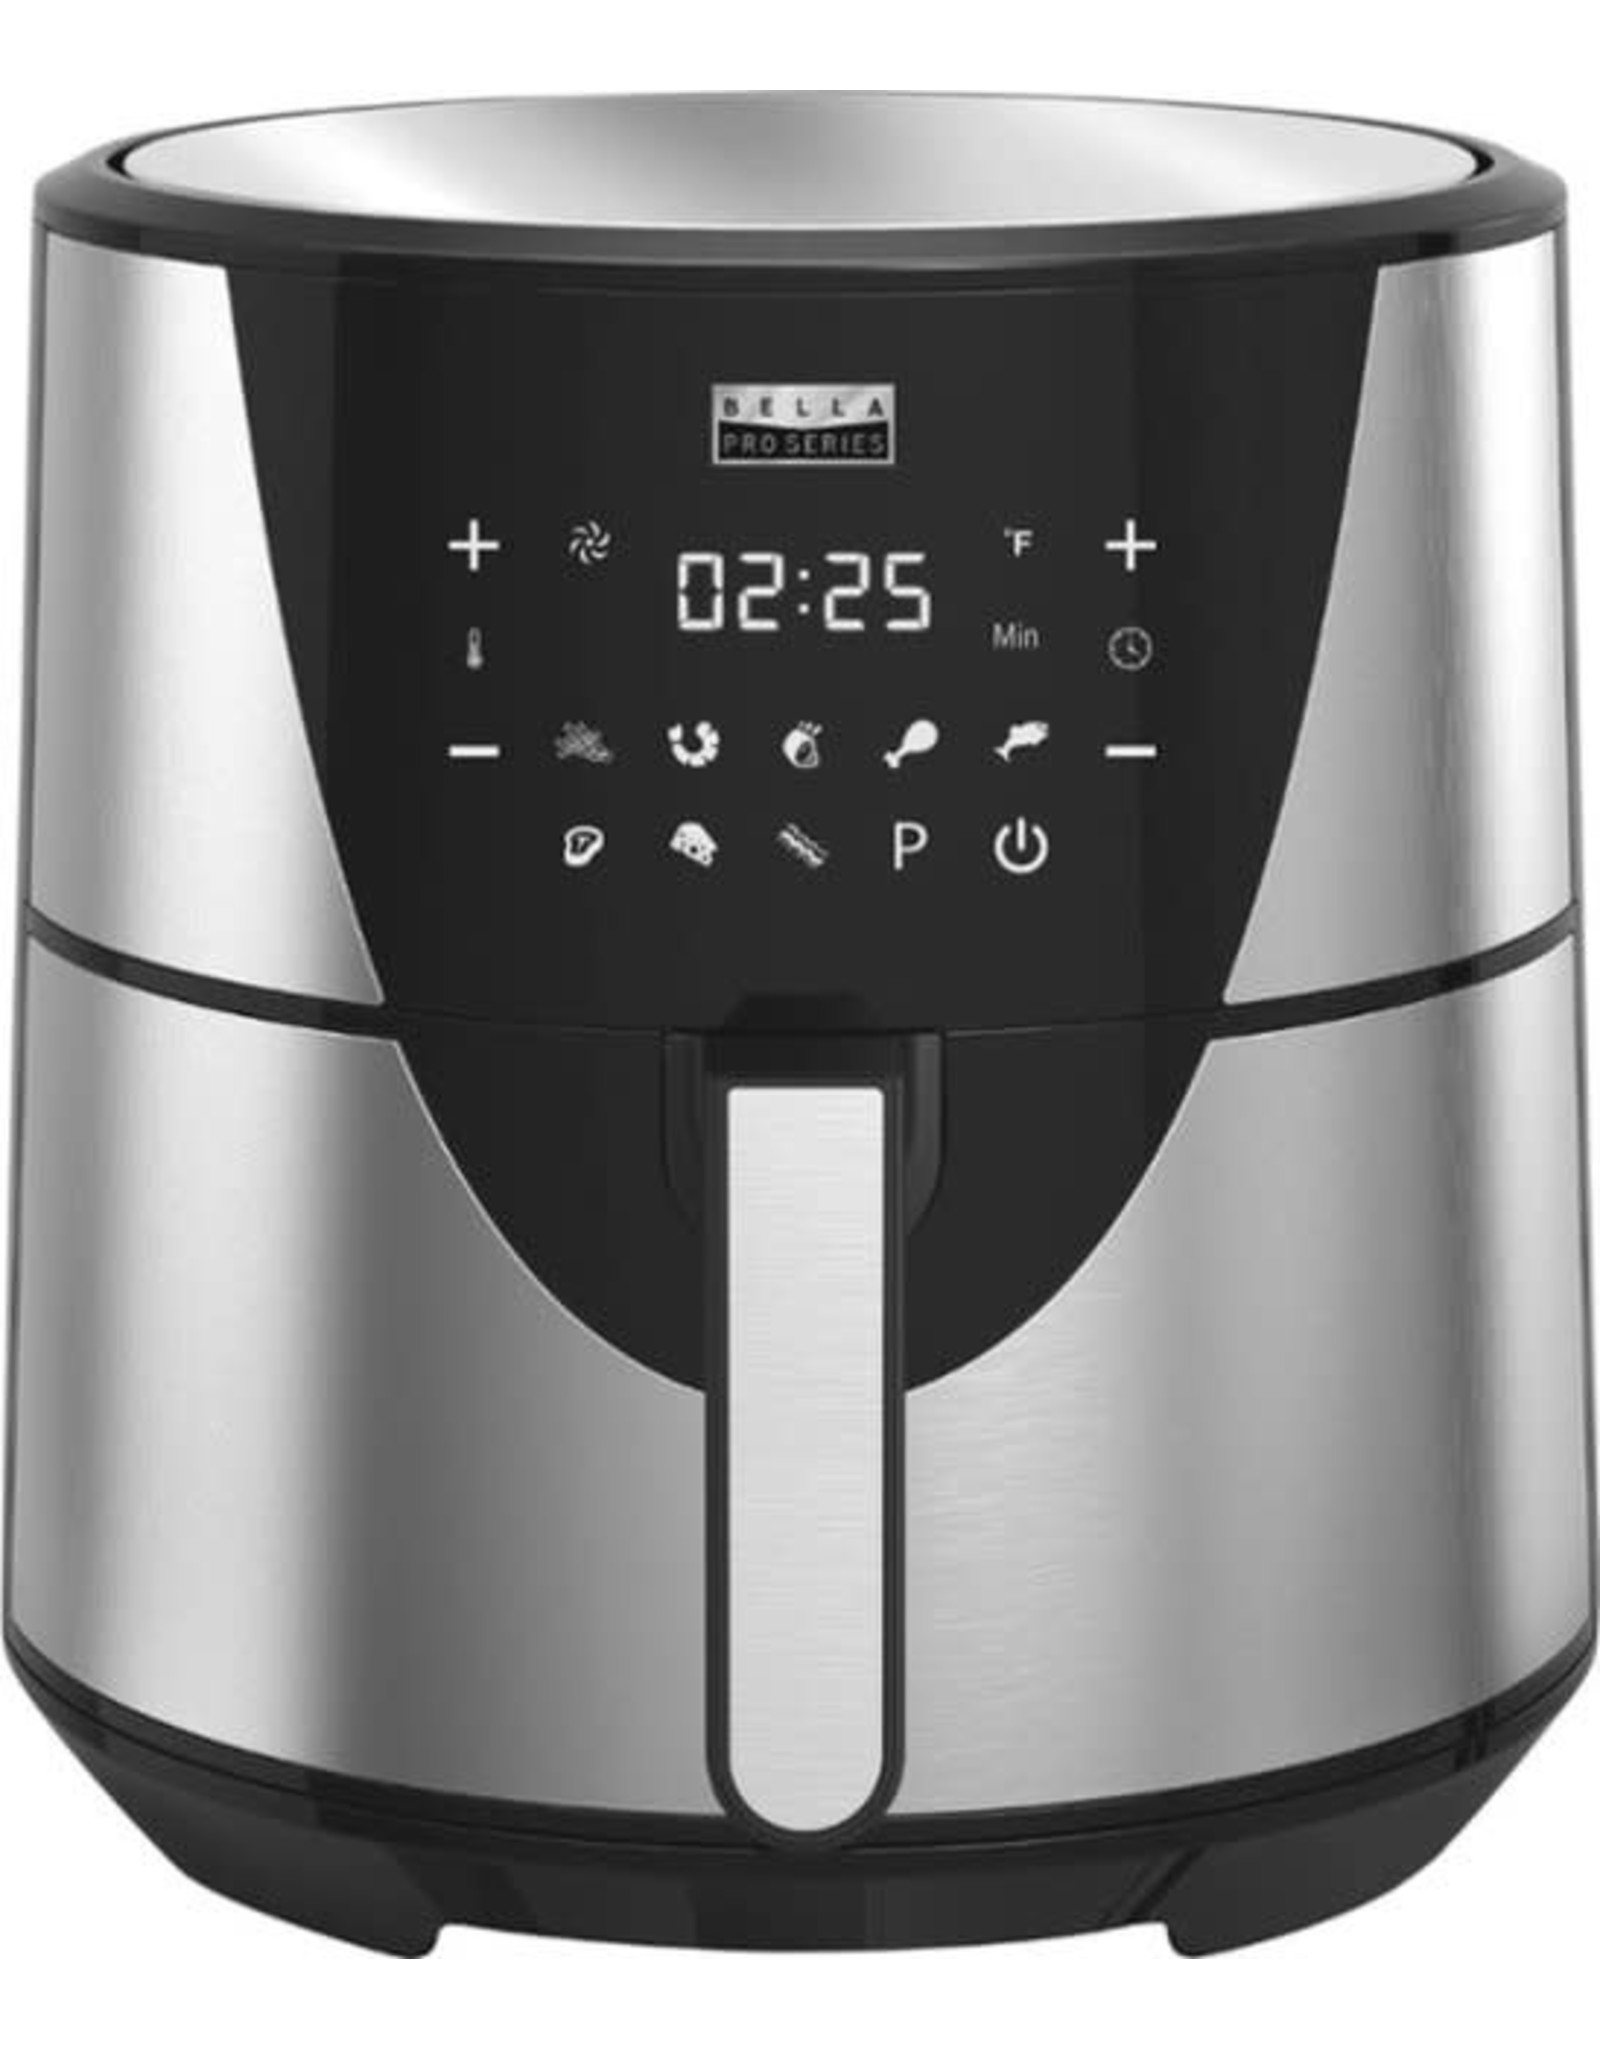 90088 Bella Pro Series - 8-qt. Touchscreen Air Fryer - Stainless Steel -  Black Friday